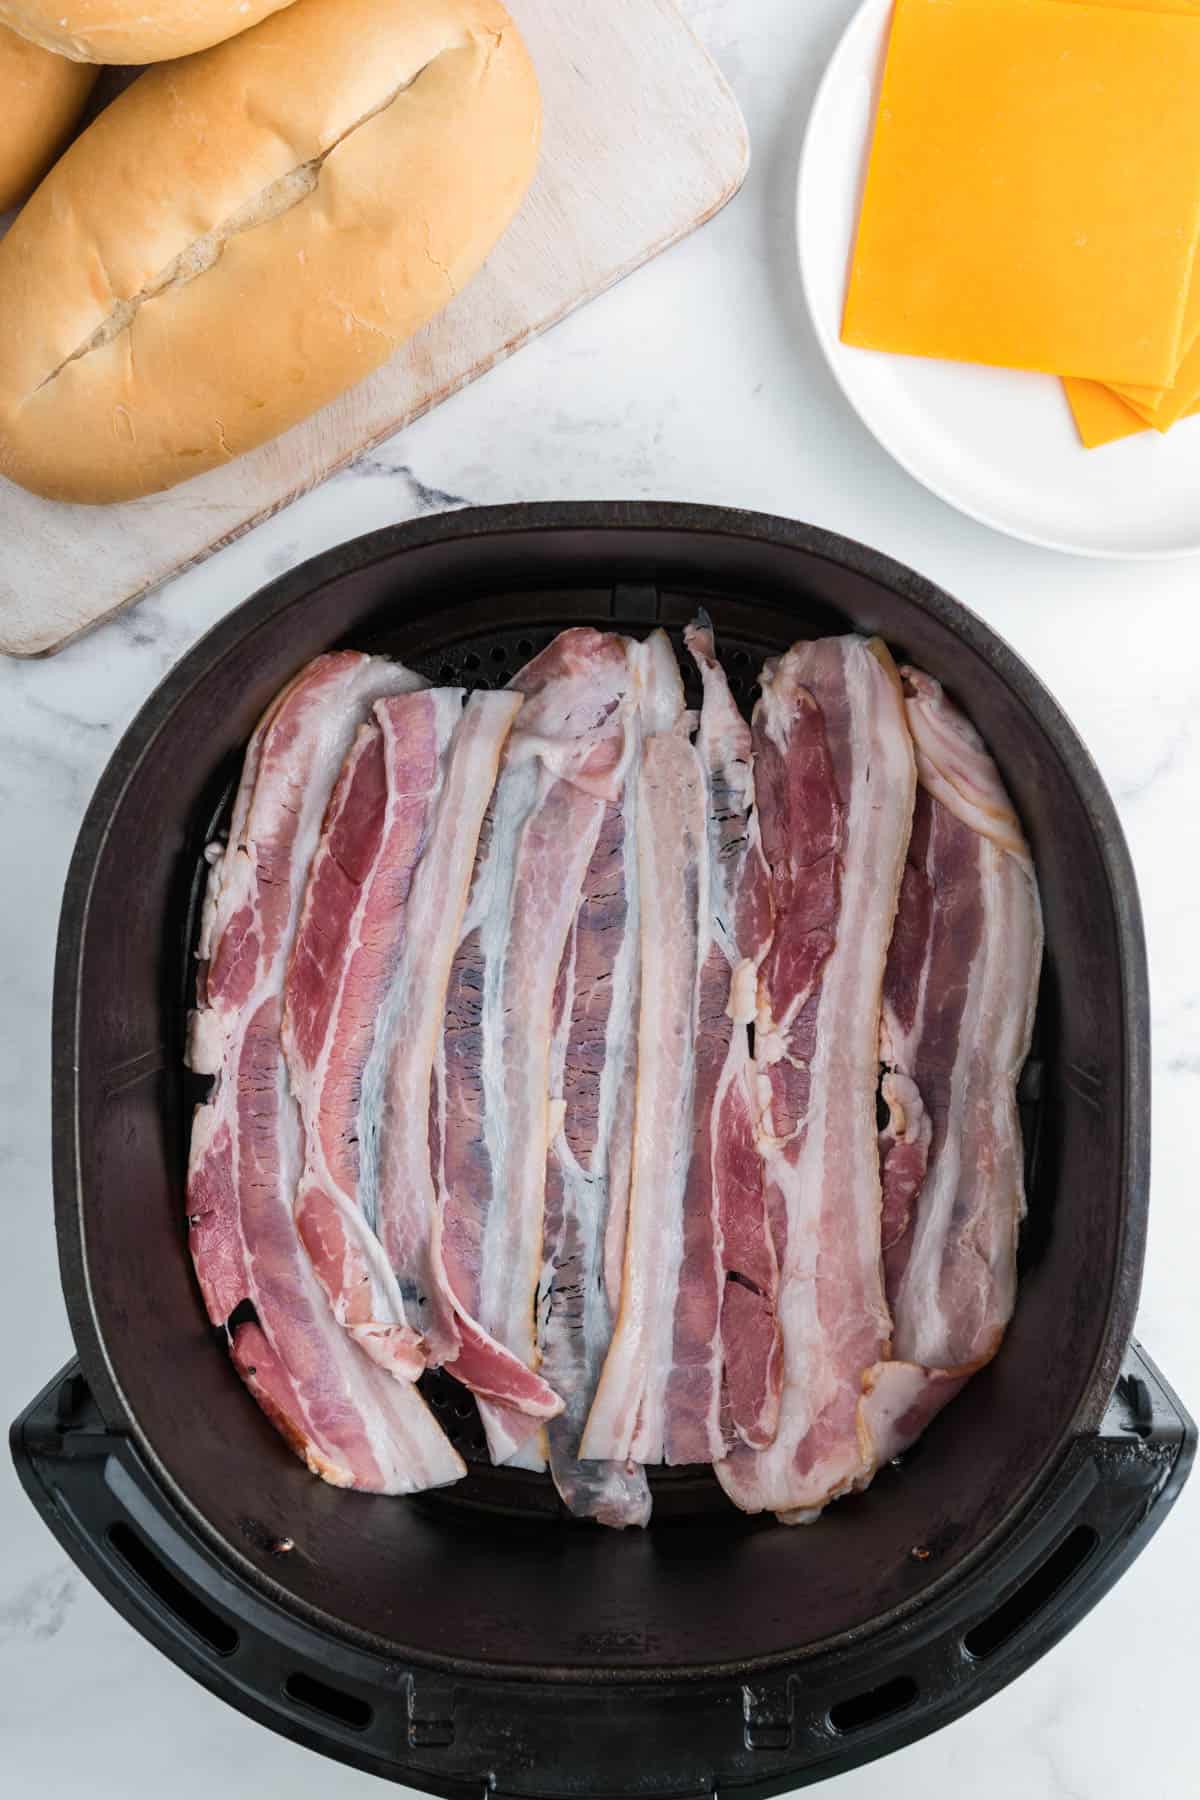 Uncooked bacon in an air fryer basket.